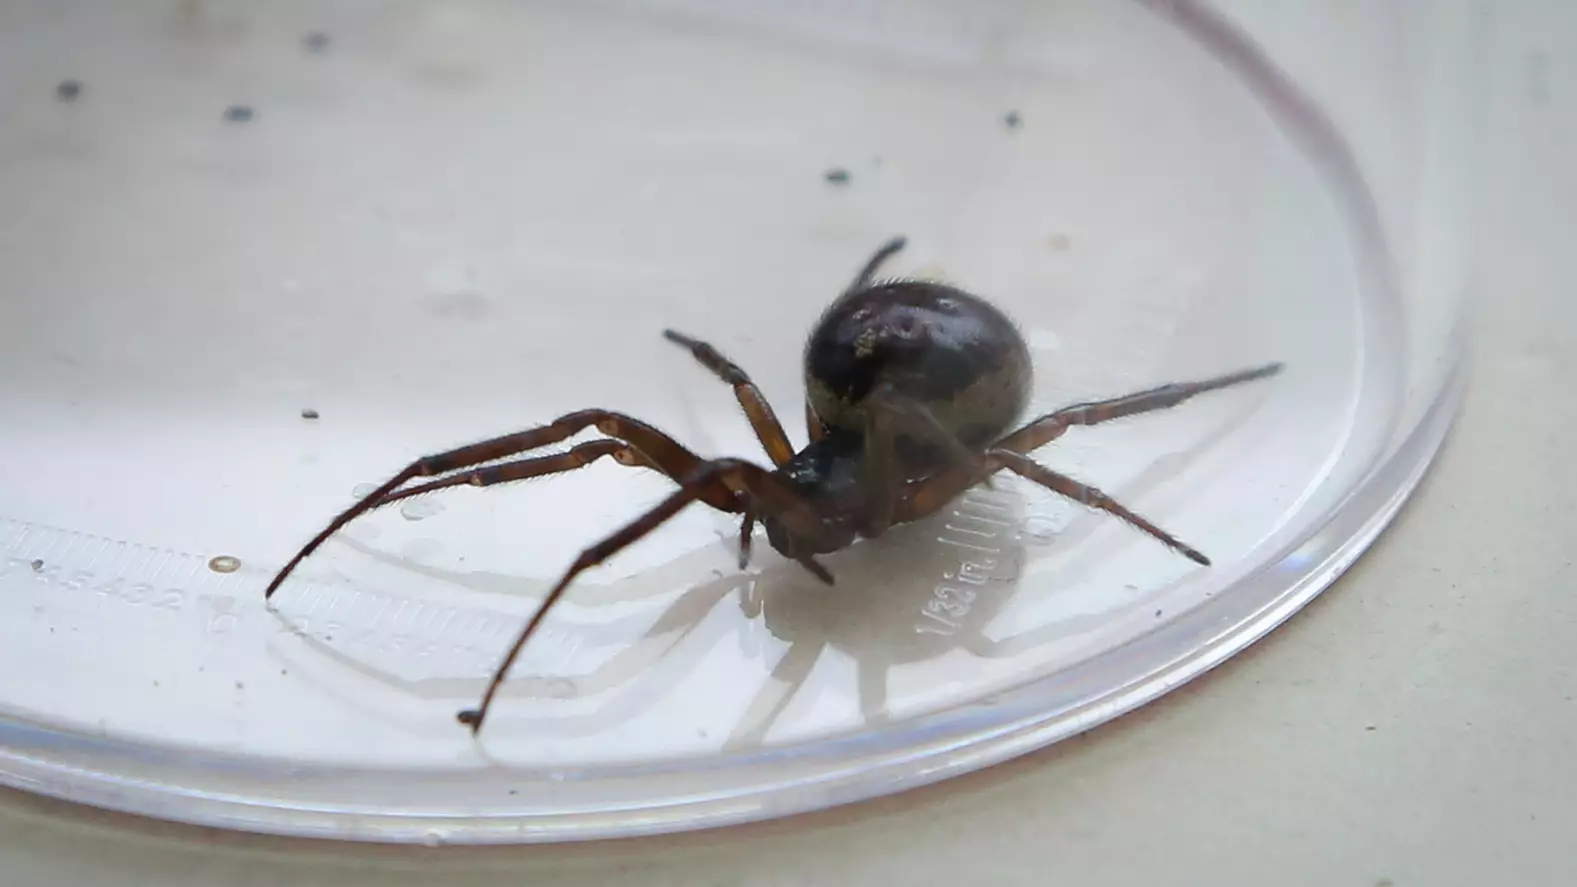 Poisonous Spider Sightings Surge In The UK As Lockdown Continues